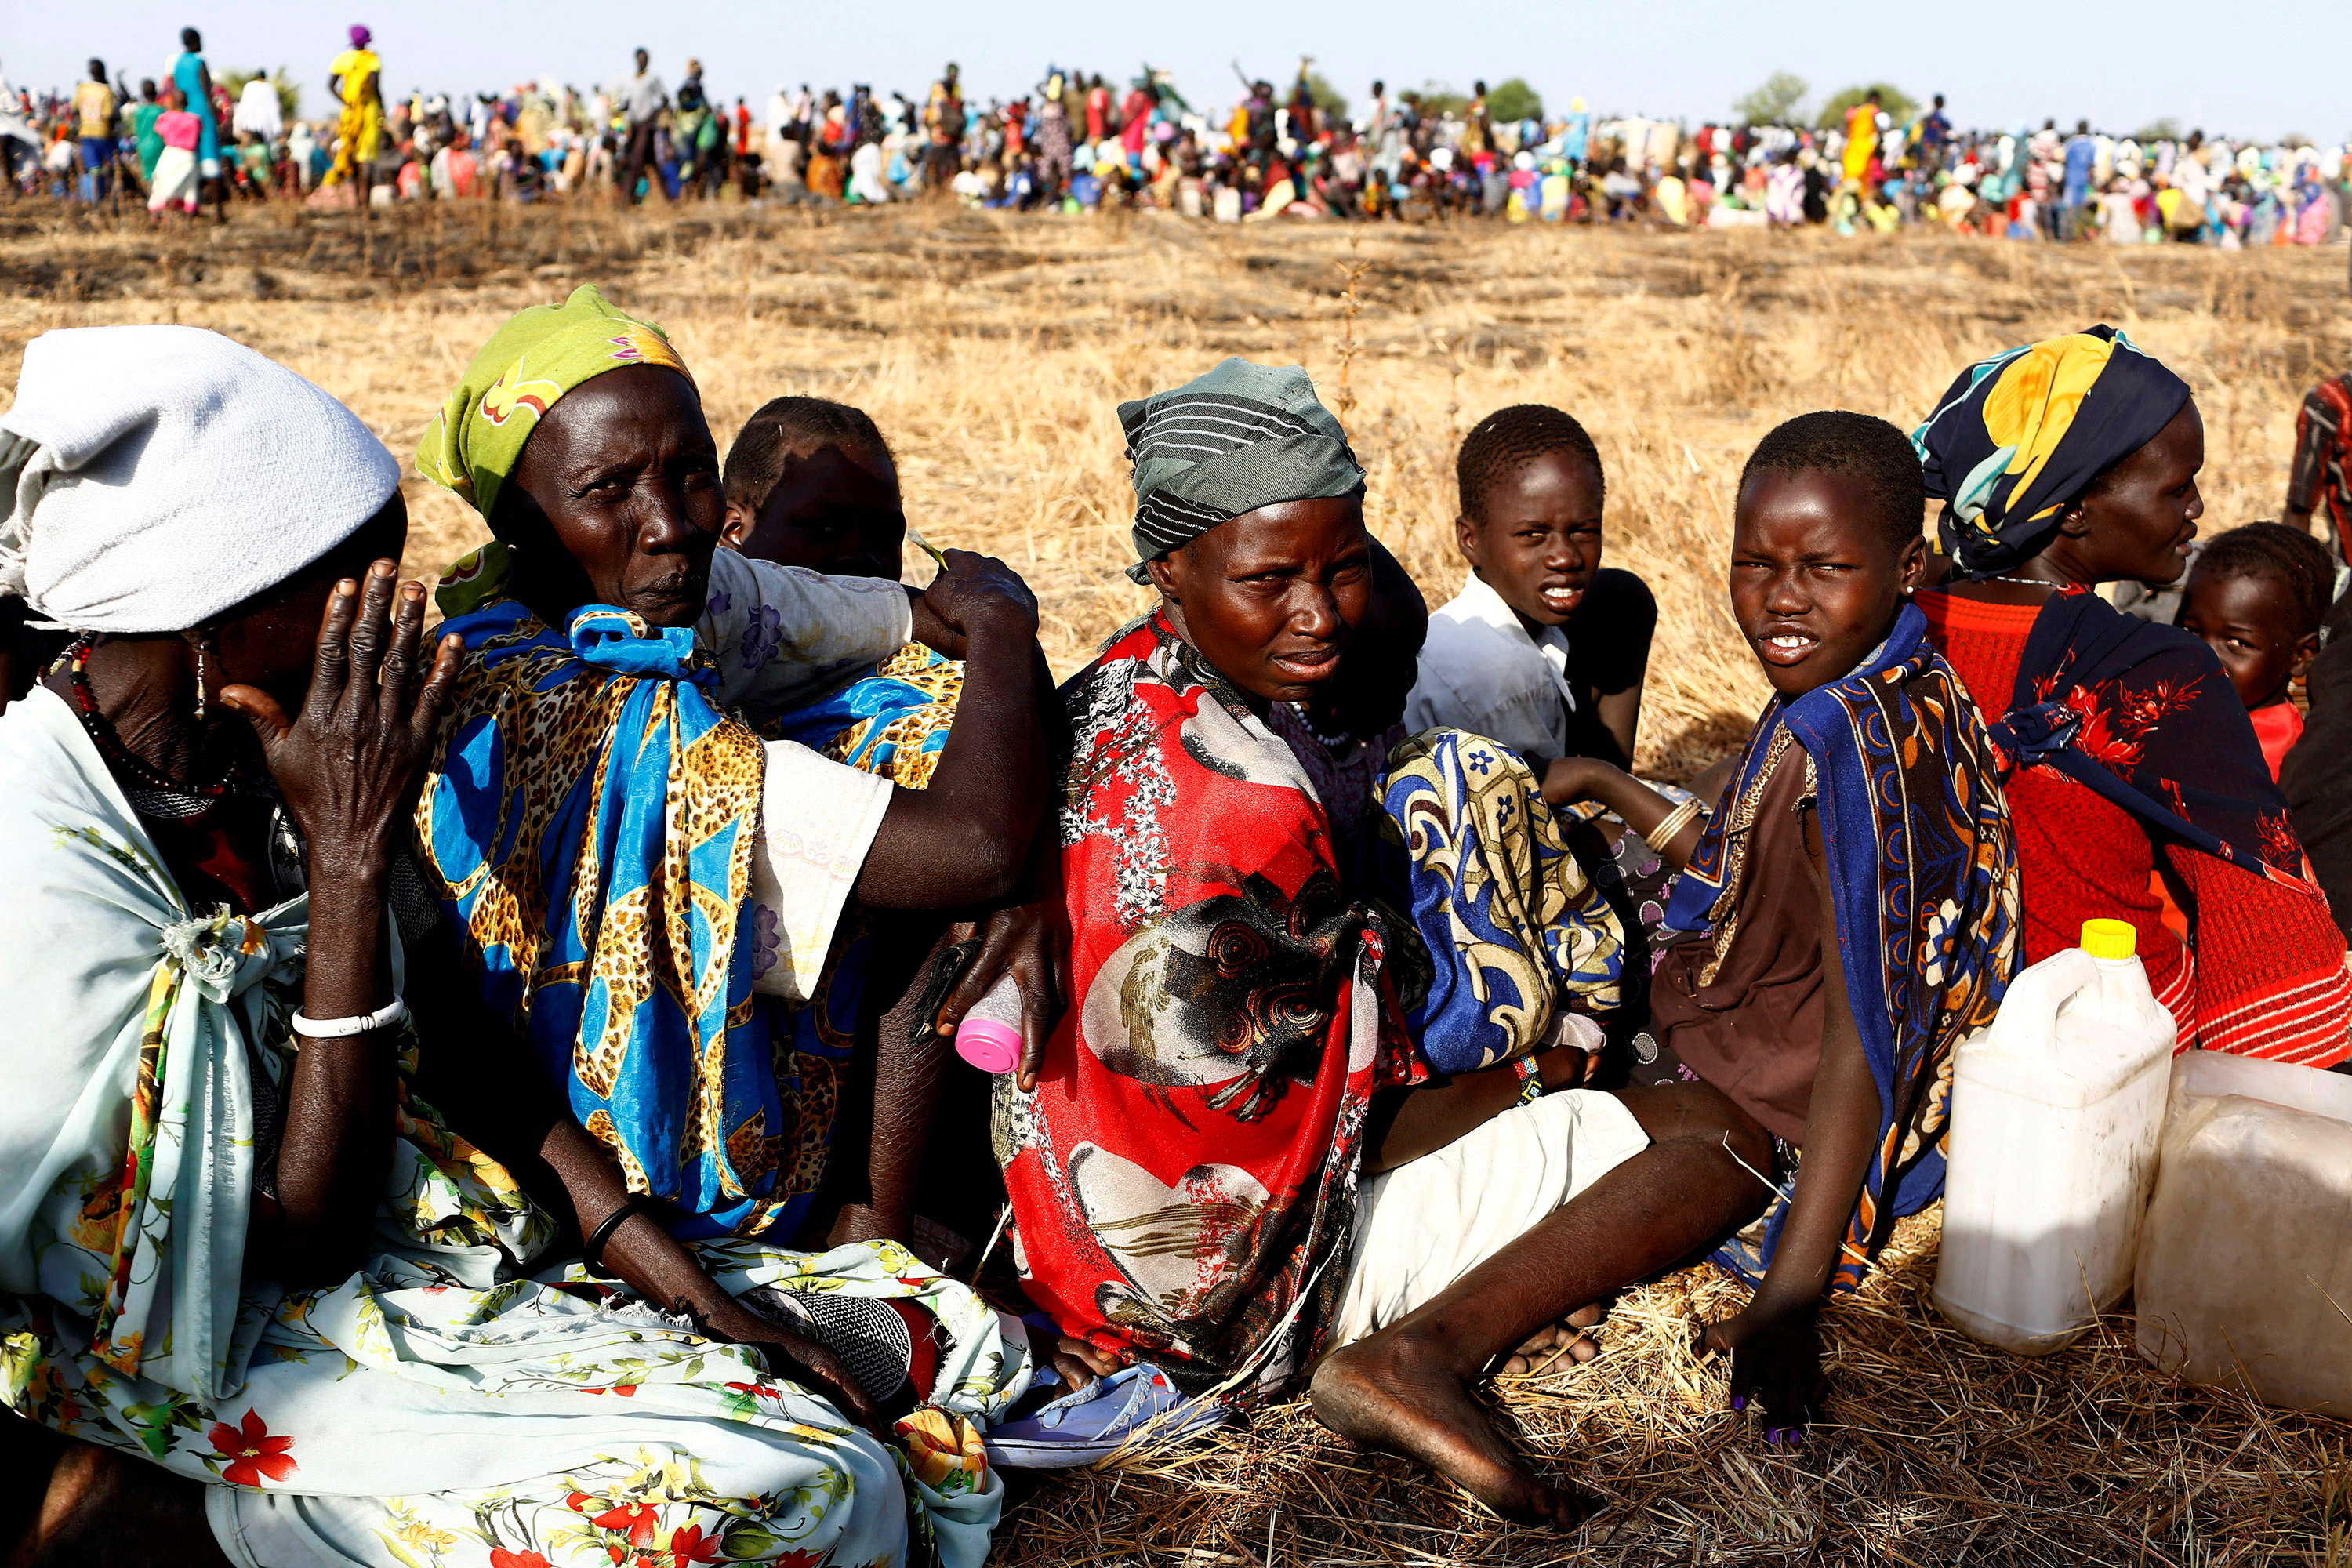 Women and children wait to be registered prior to a food distribution carried out by the United Nations World Food Programme (WFP) in Thonyor, Leer state, South Sudan